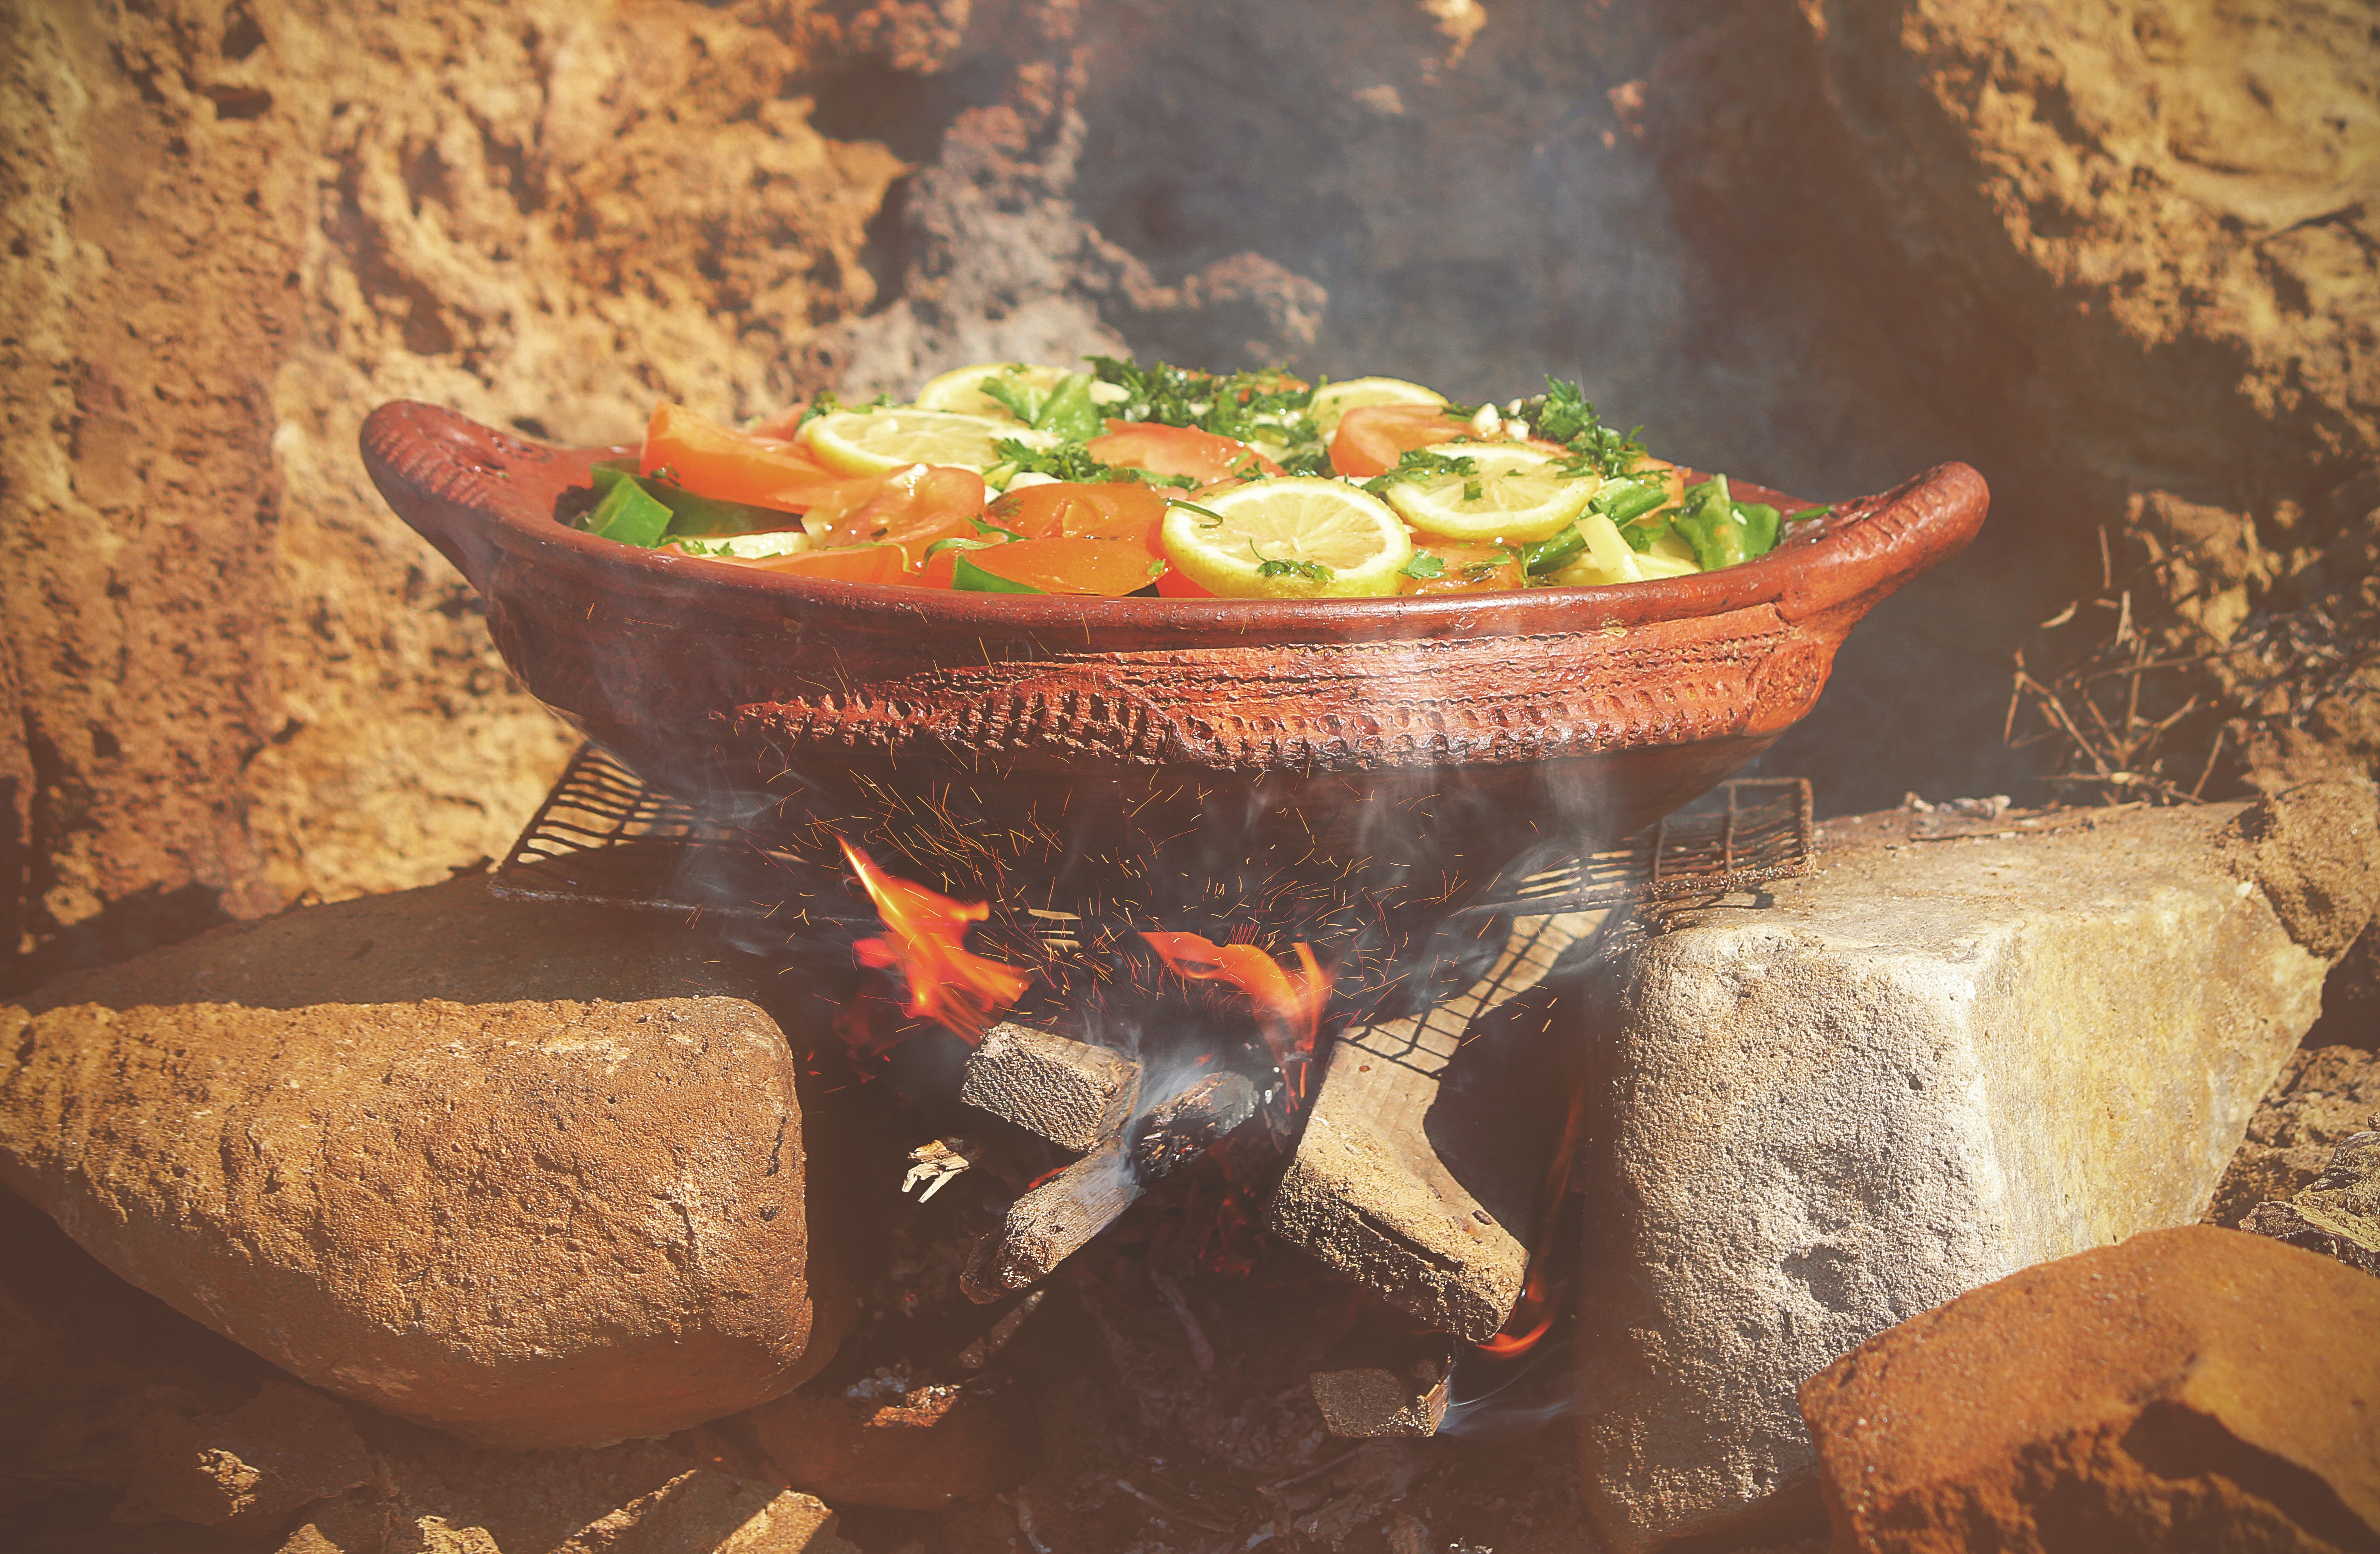 brown pot filled with sliced fruit and vegetable over fire during daytime